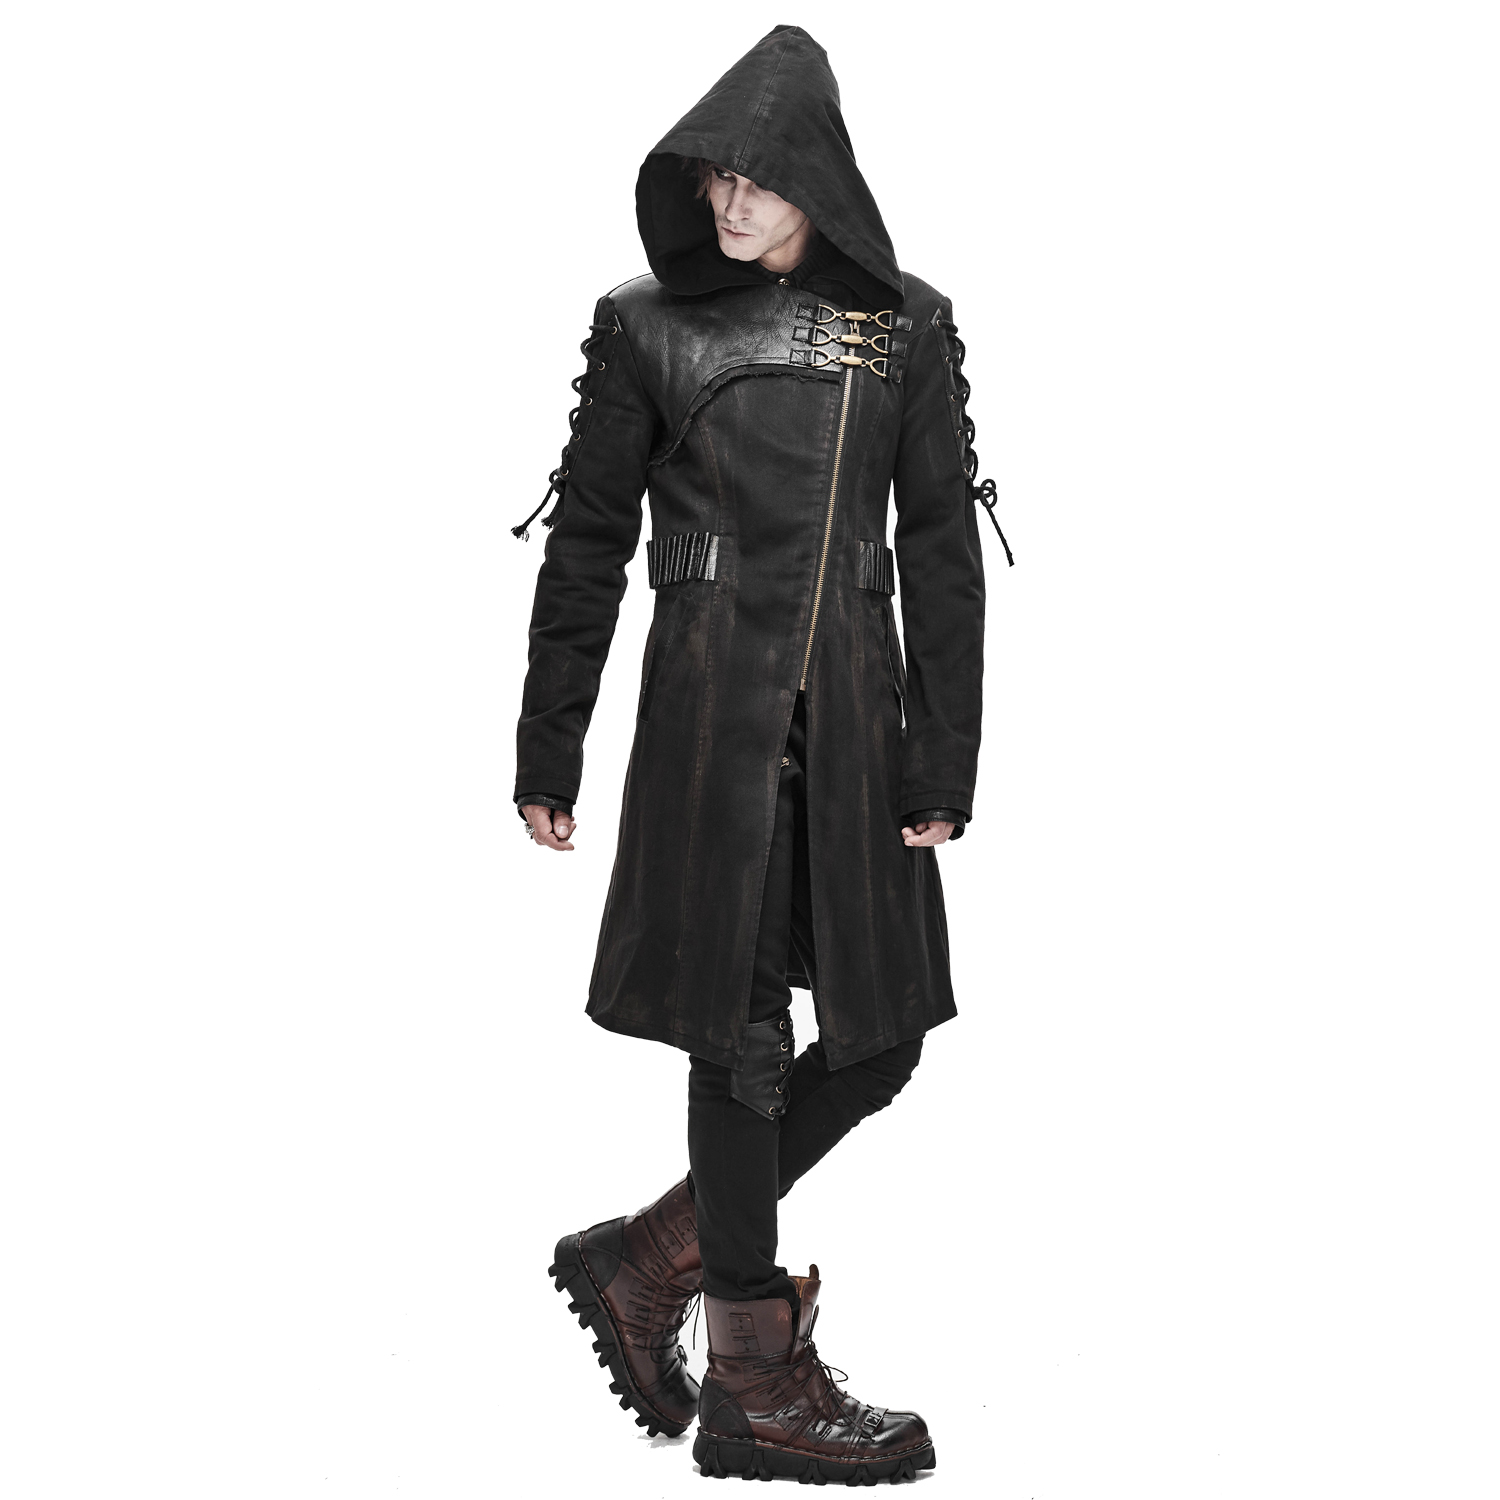 Black 'Creed' Hooded Long Jacket by Devil Fashion • the dark store™